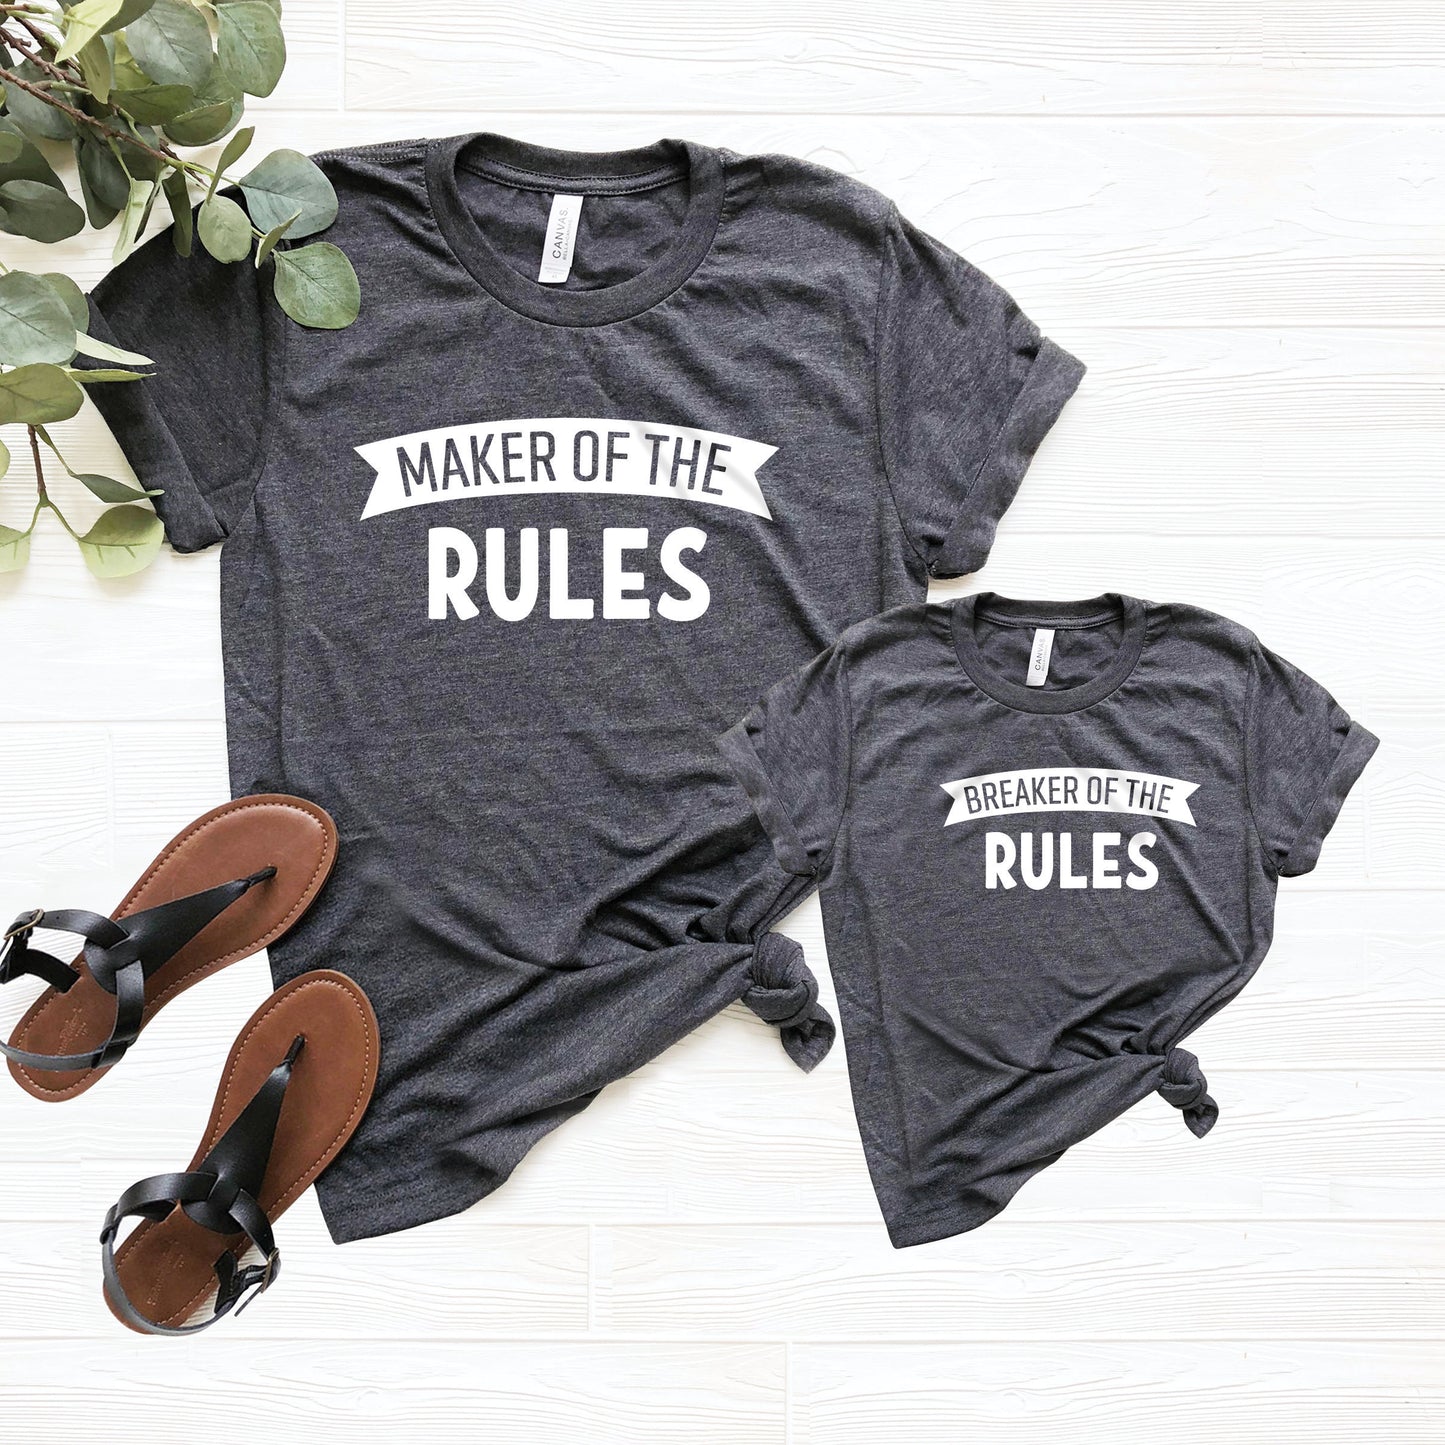 Maker and Breaker of The Rules Shirt